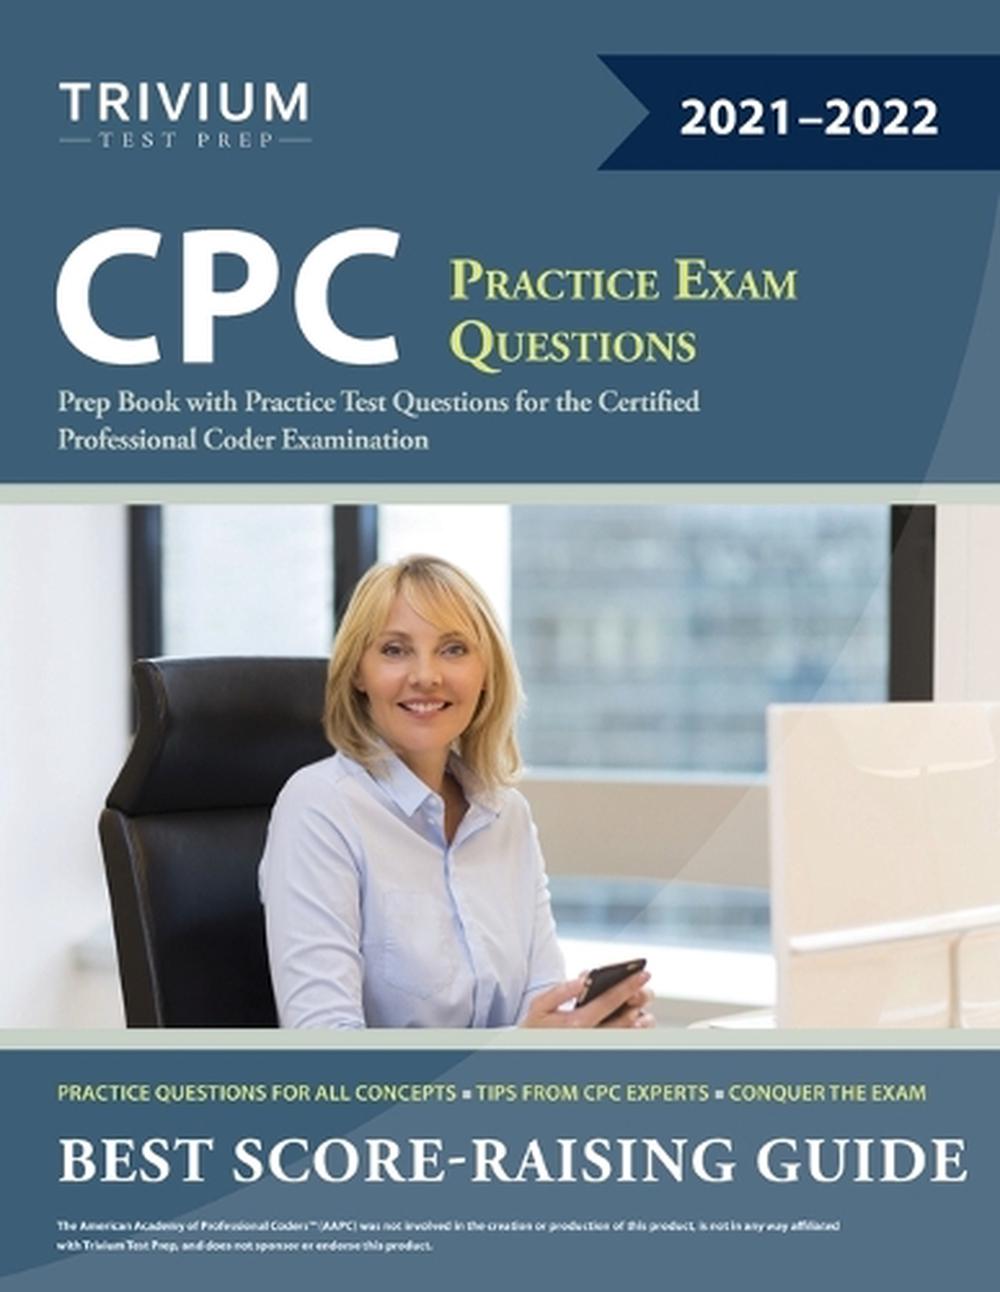 cpc-practice-exam-questions-prep-book-with-practice-test-questions-for